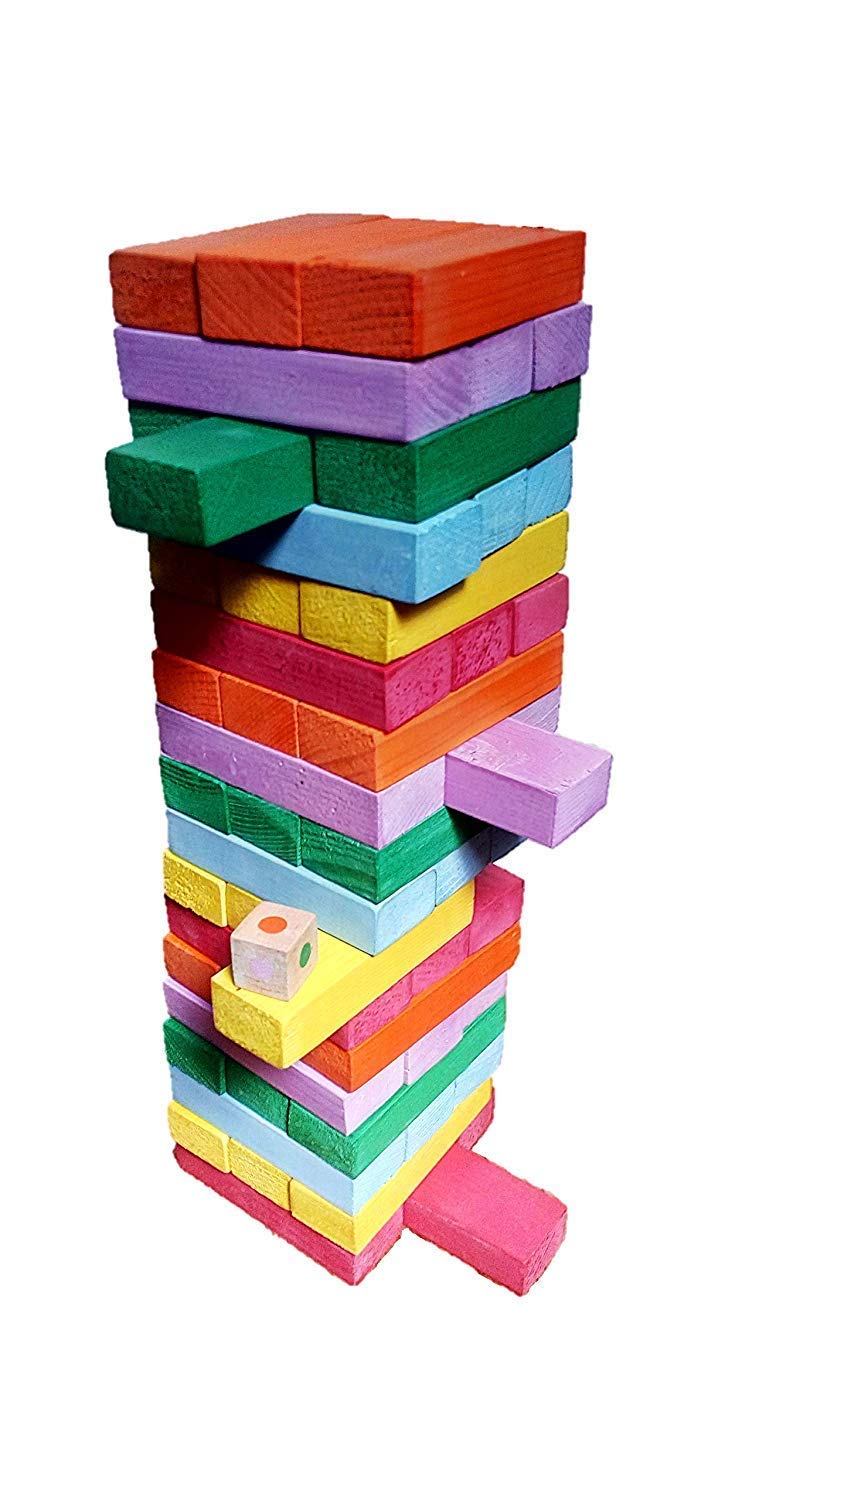 Wooden Block Stacking Game for Kids, Adults| Wooden Tumbling Tower – Multicolor